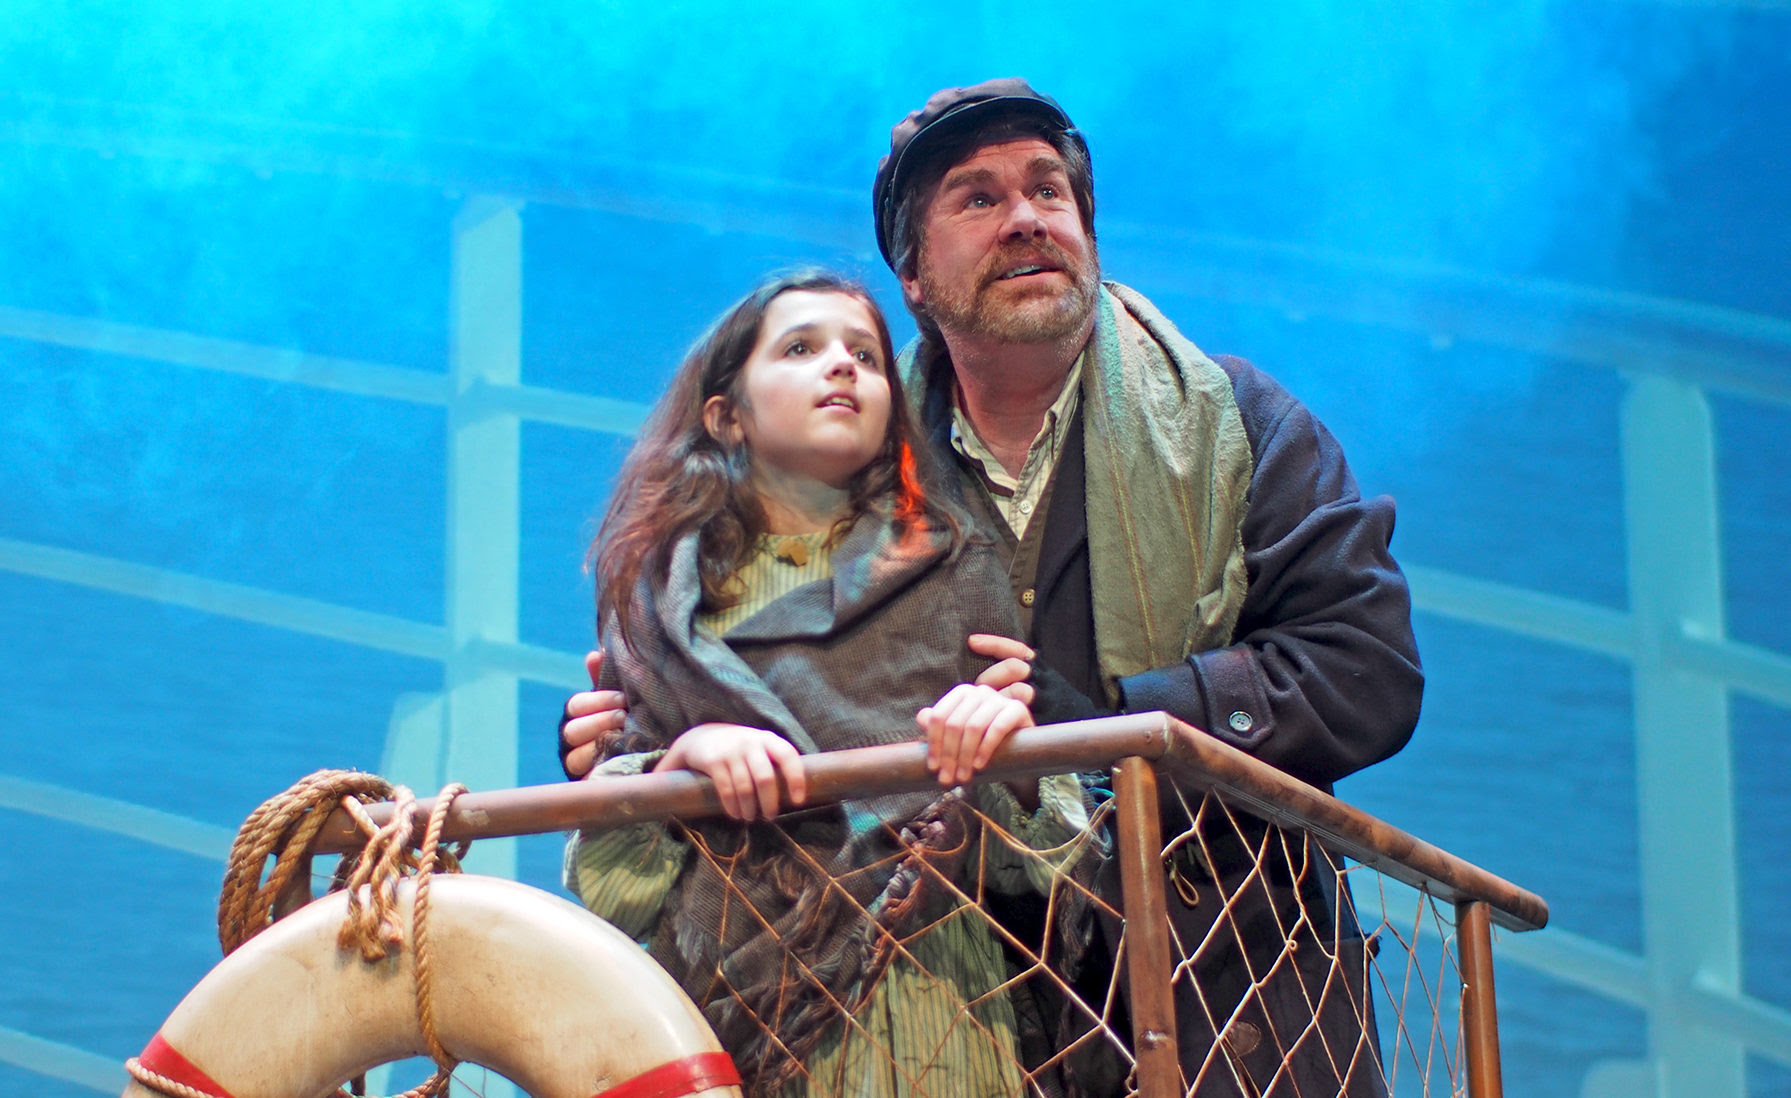 Hannah Dwyer as Little Girl with Michael Hammond as her father Tateh